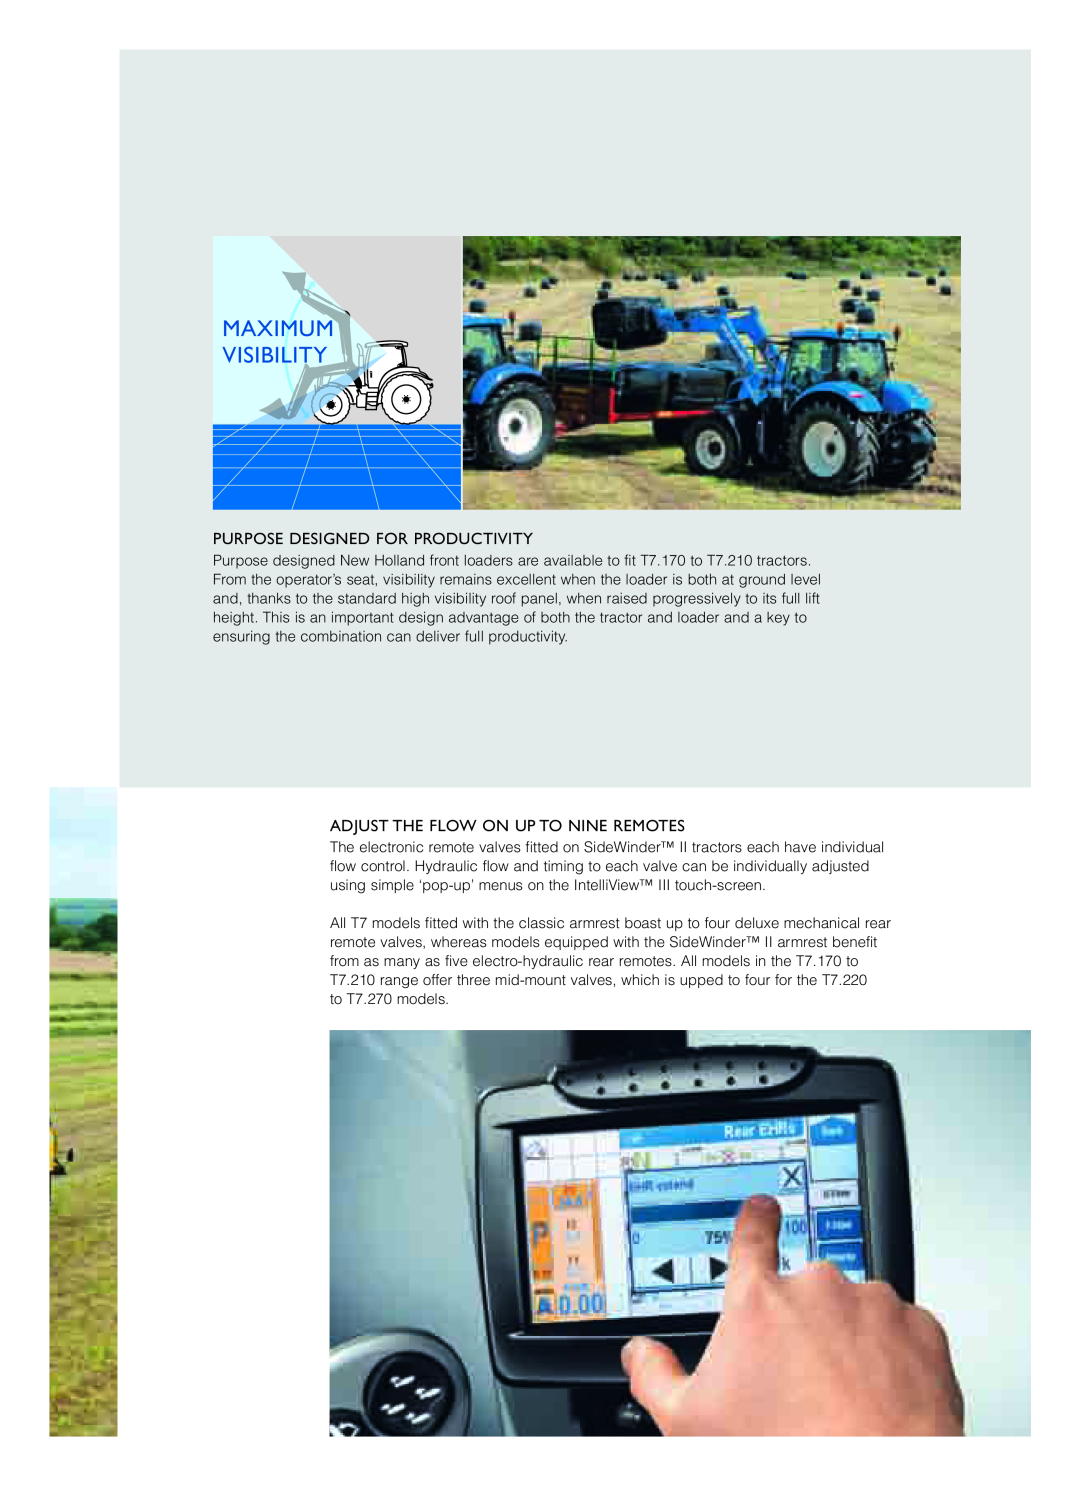 New Holland T7.200, T7.270 Purpose Designed For Productivity, Adjust The Flow On Up To Nine Remotes, Maximum Visibility 